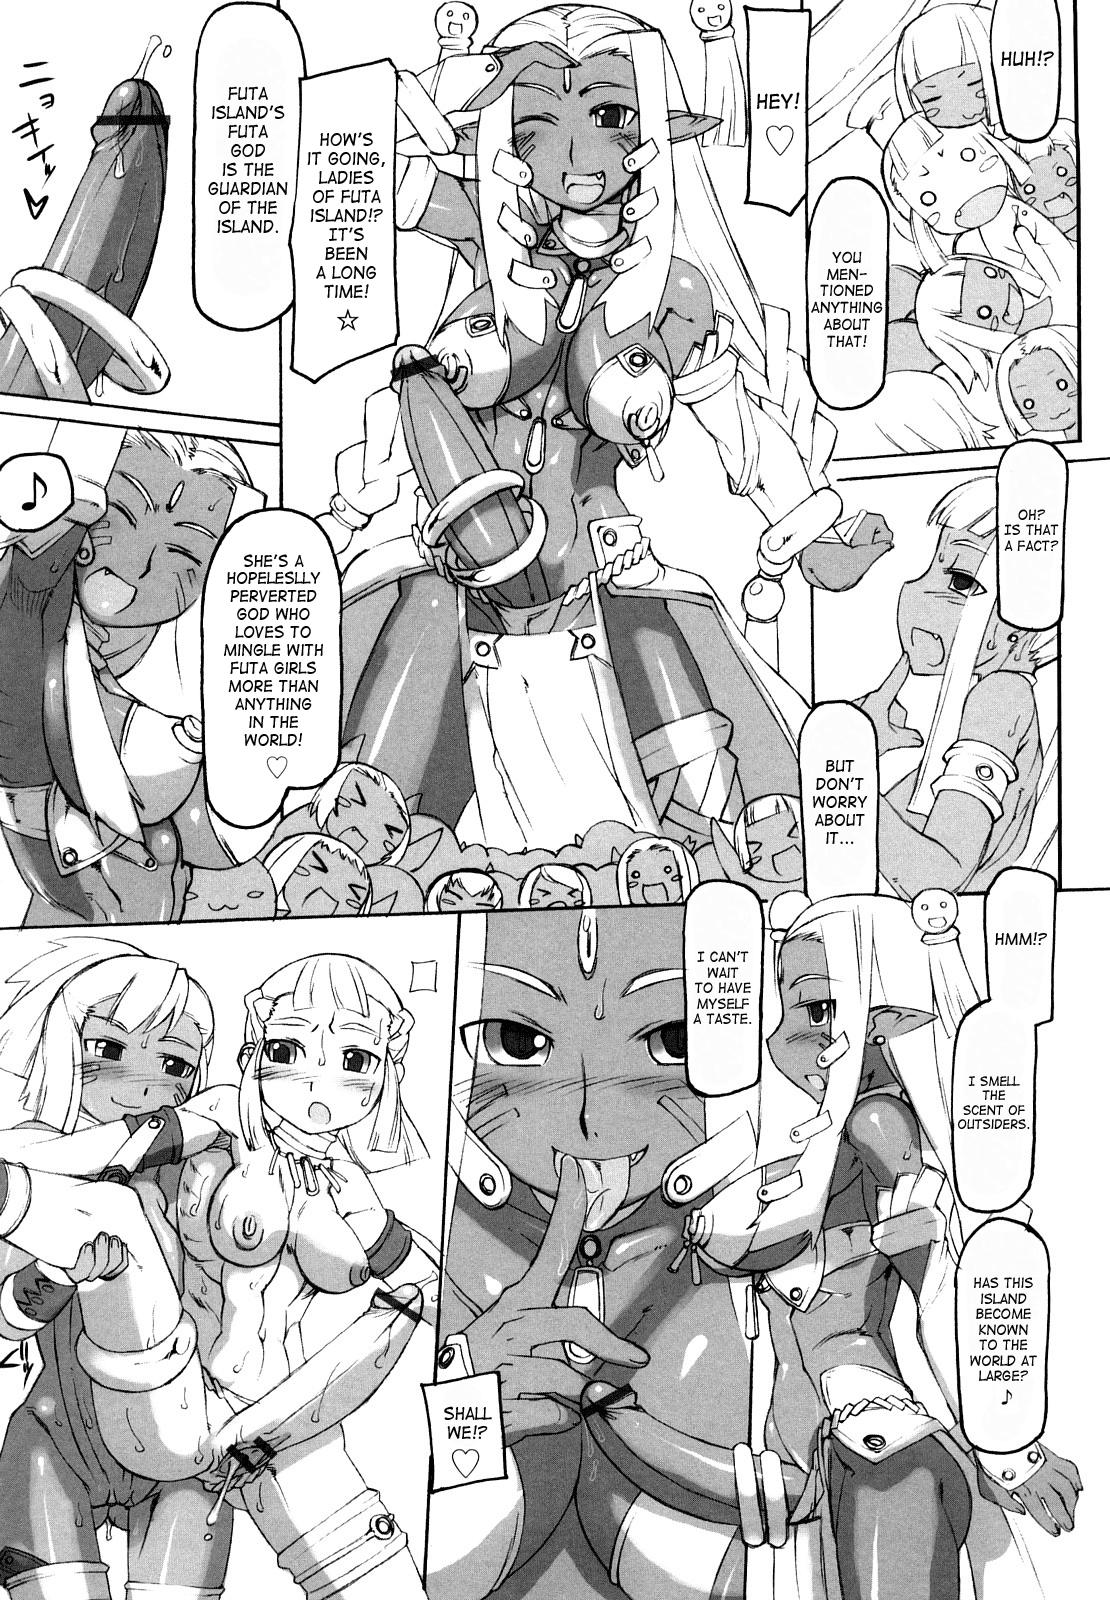 Real Sex [T.K-1] Temptation of F Ch.6-7, 9-10 [English] [SaHa] Celebrities - Page 11